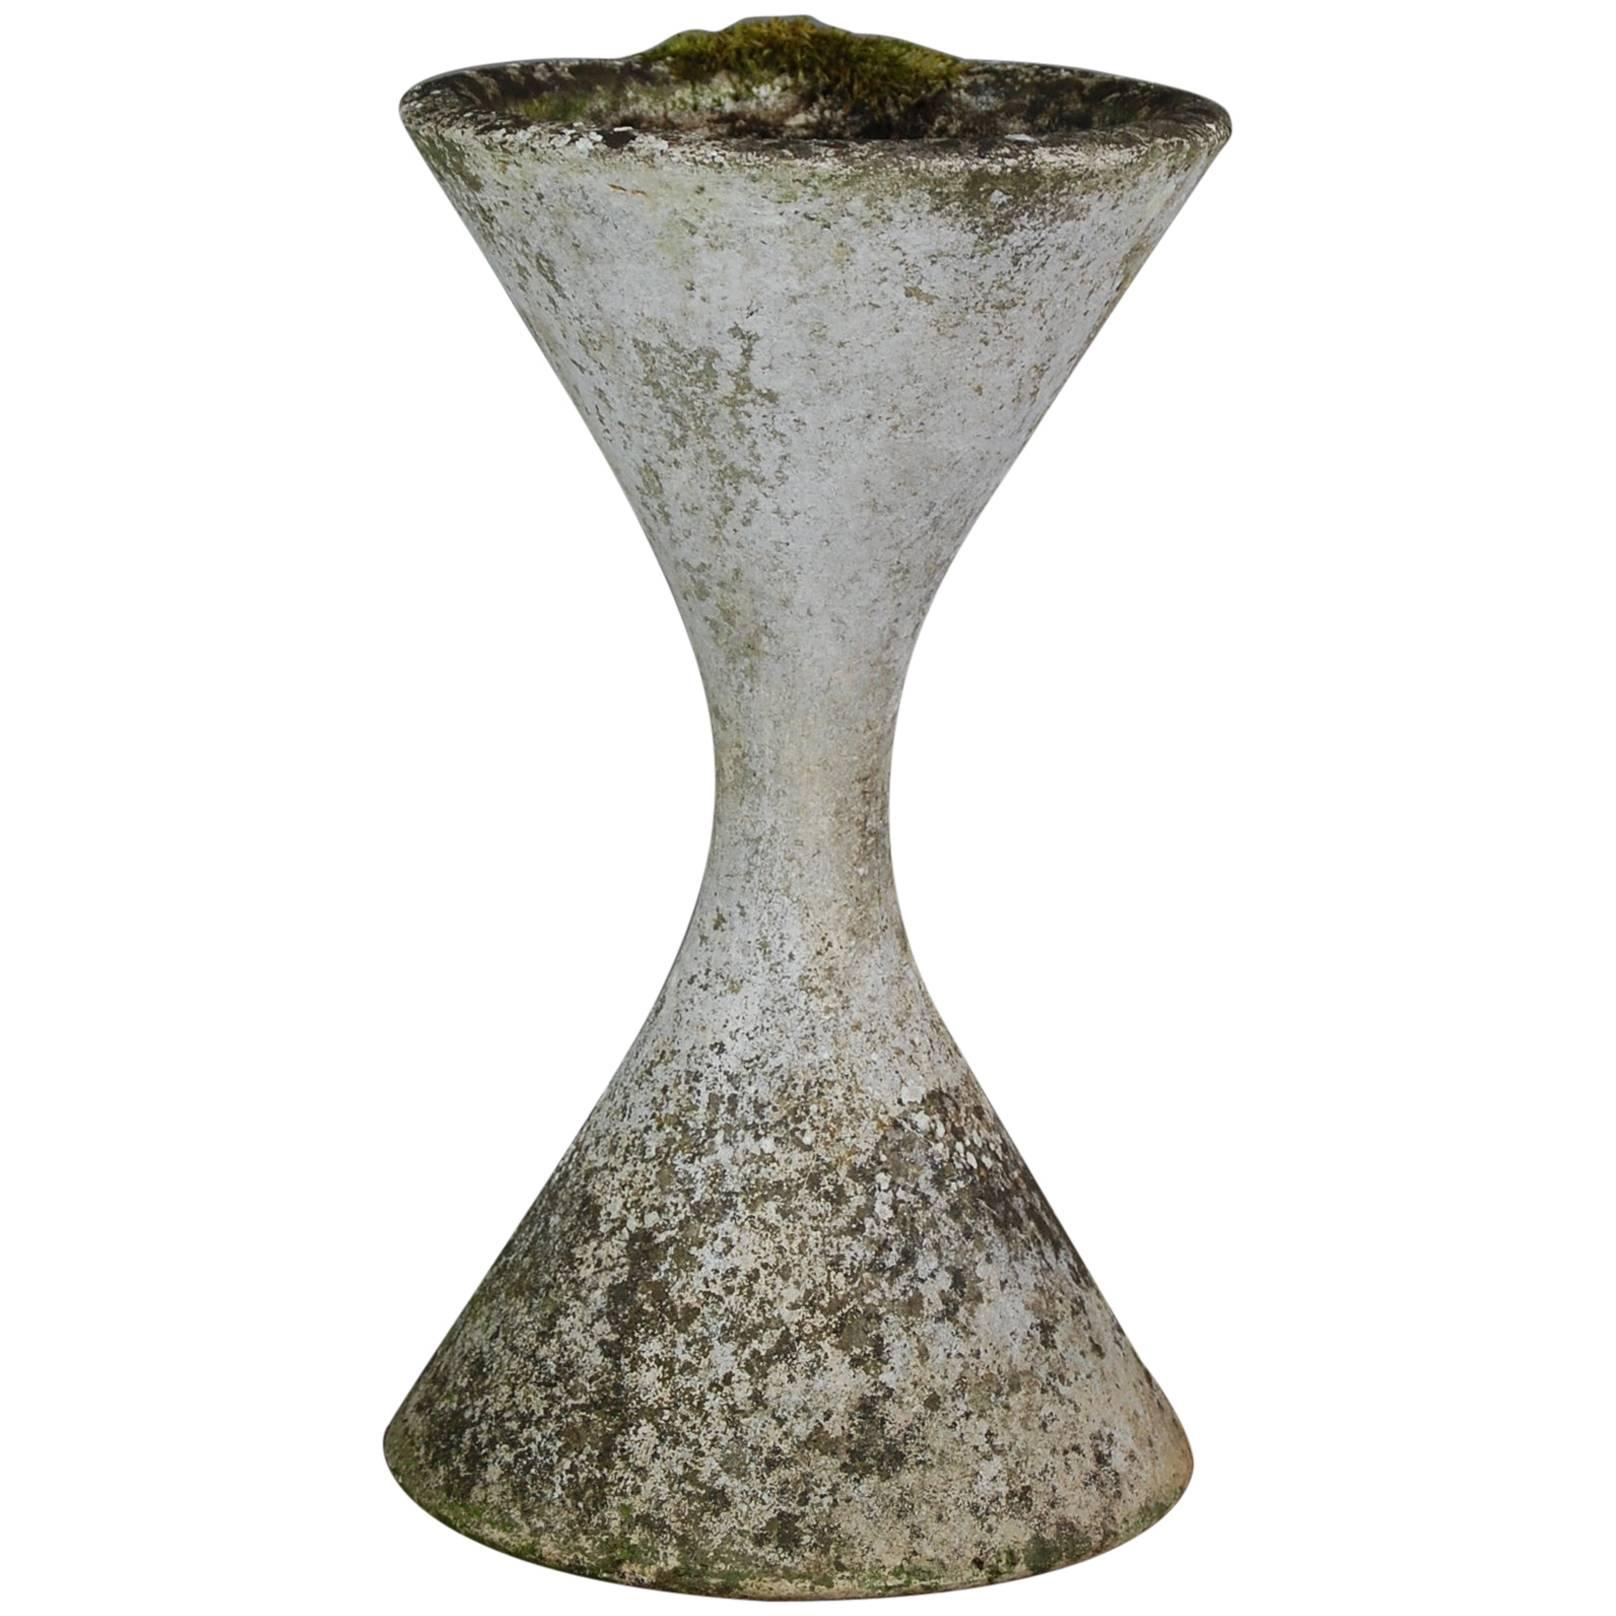 Small Willy Guhl Diabolo Planter with Exceptional Weathering